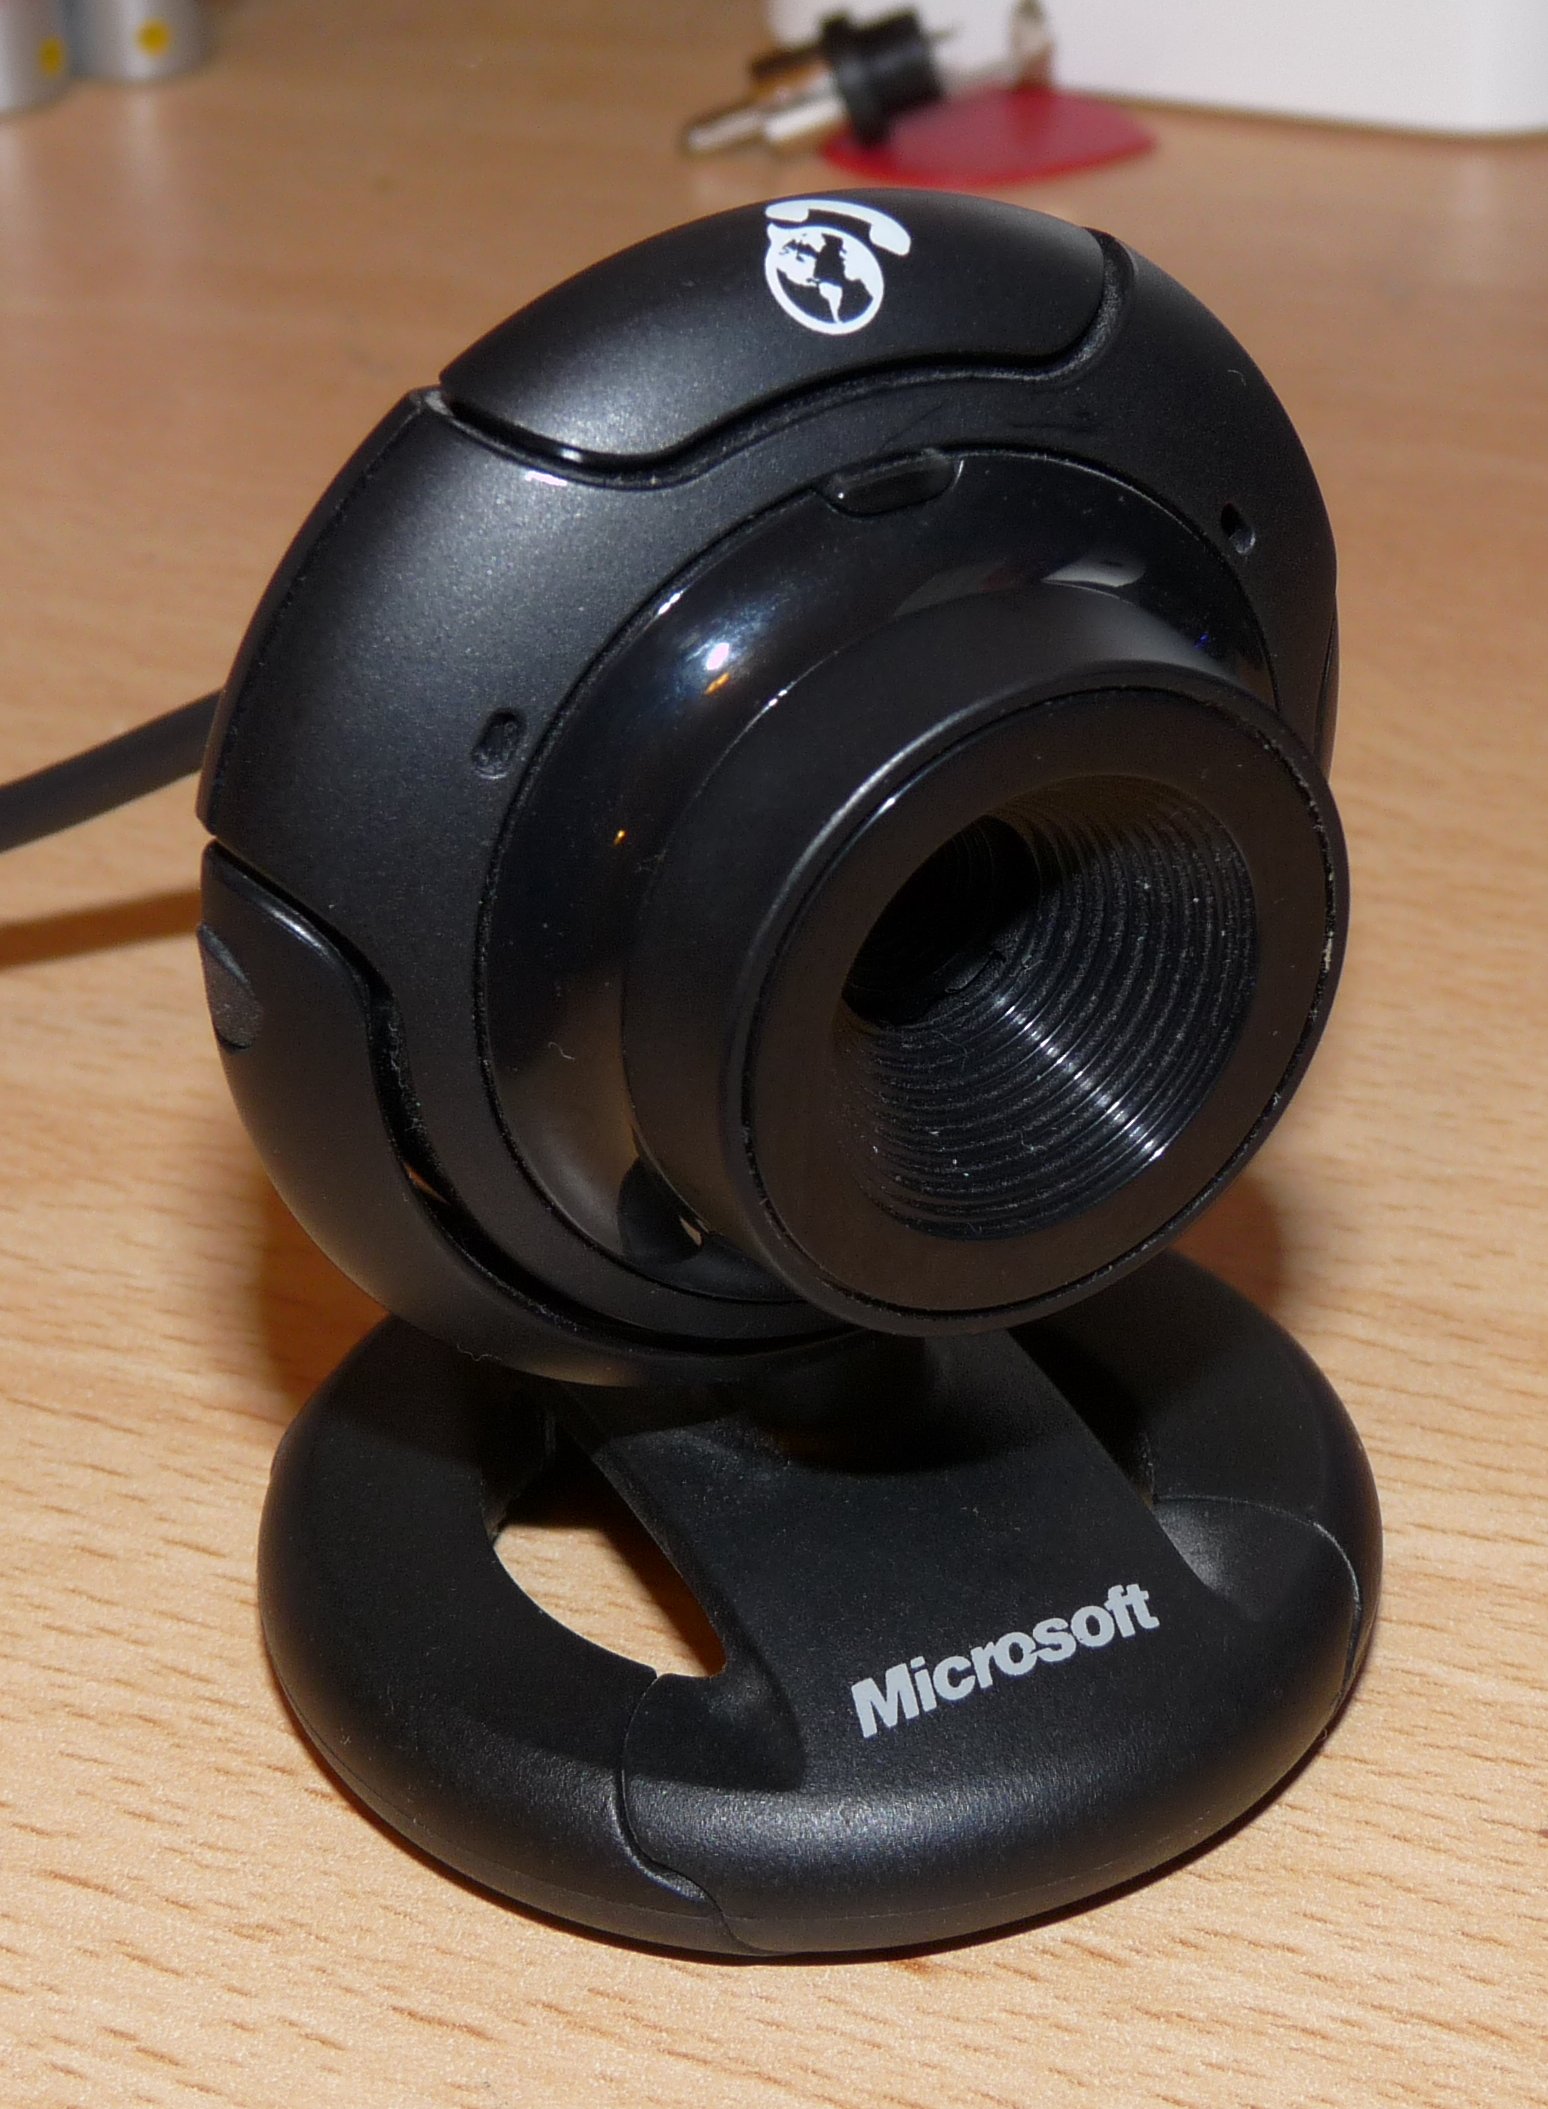 lifecam vx 3000 driver download from microsoft support